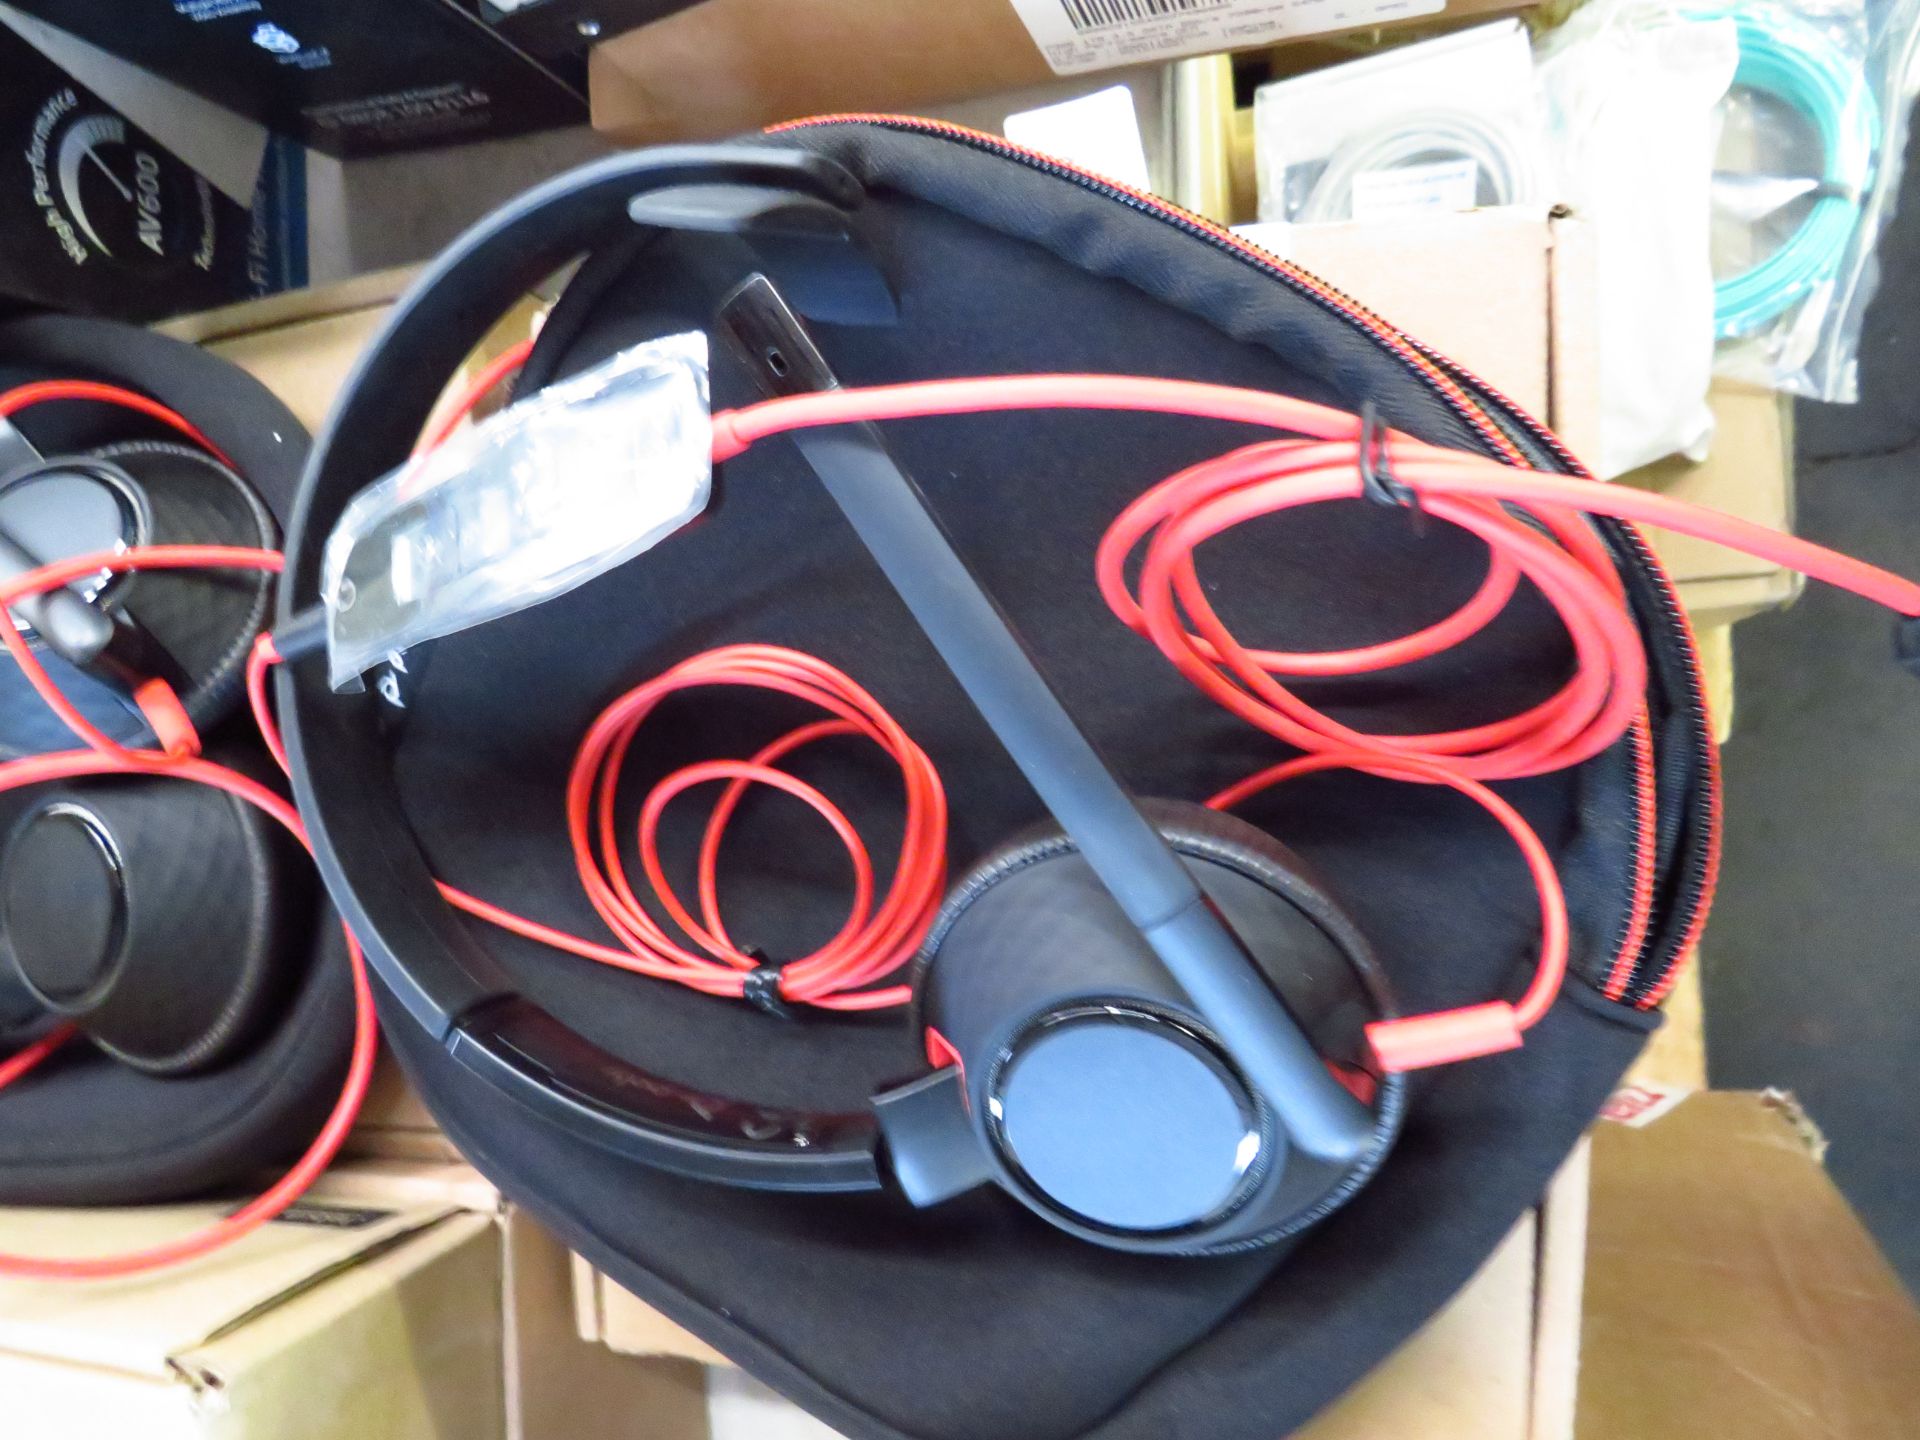 Poly Blackwire 5210 mono Usb headset, tested and working for sound to the earpiece and microphone